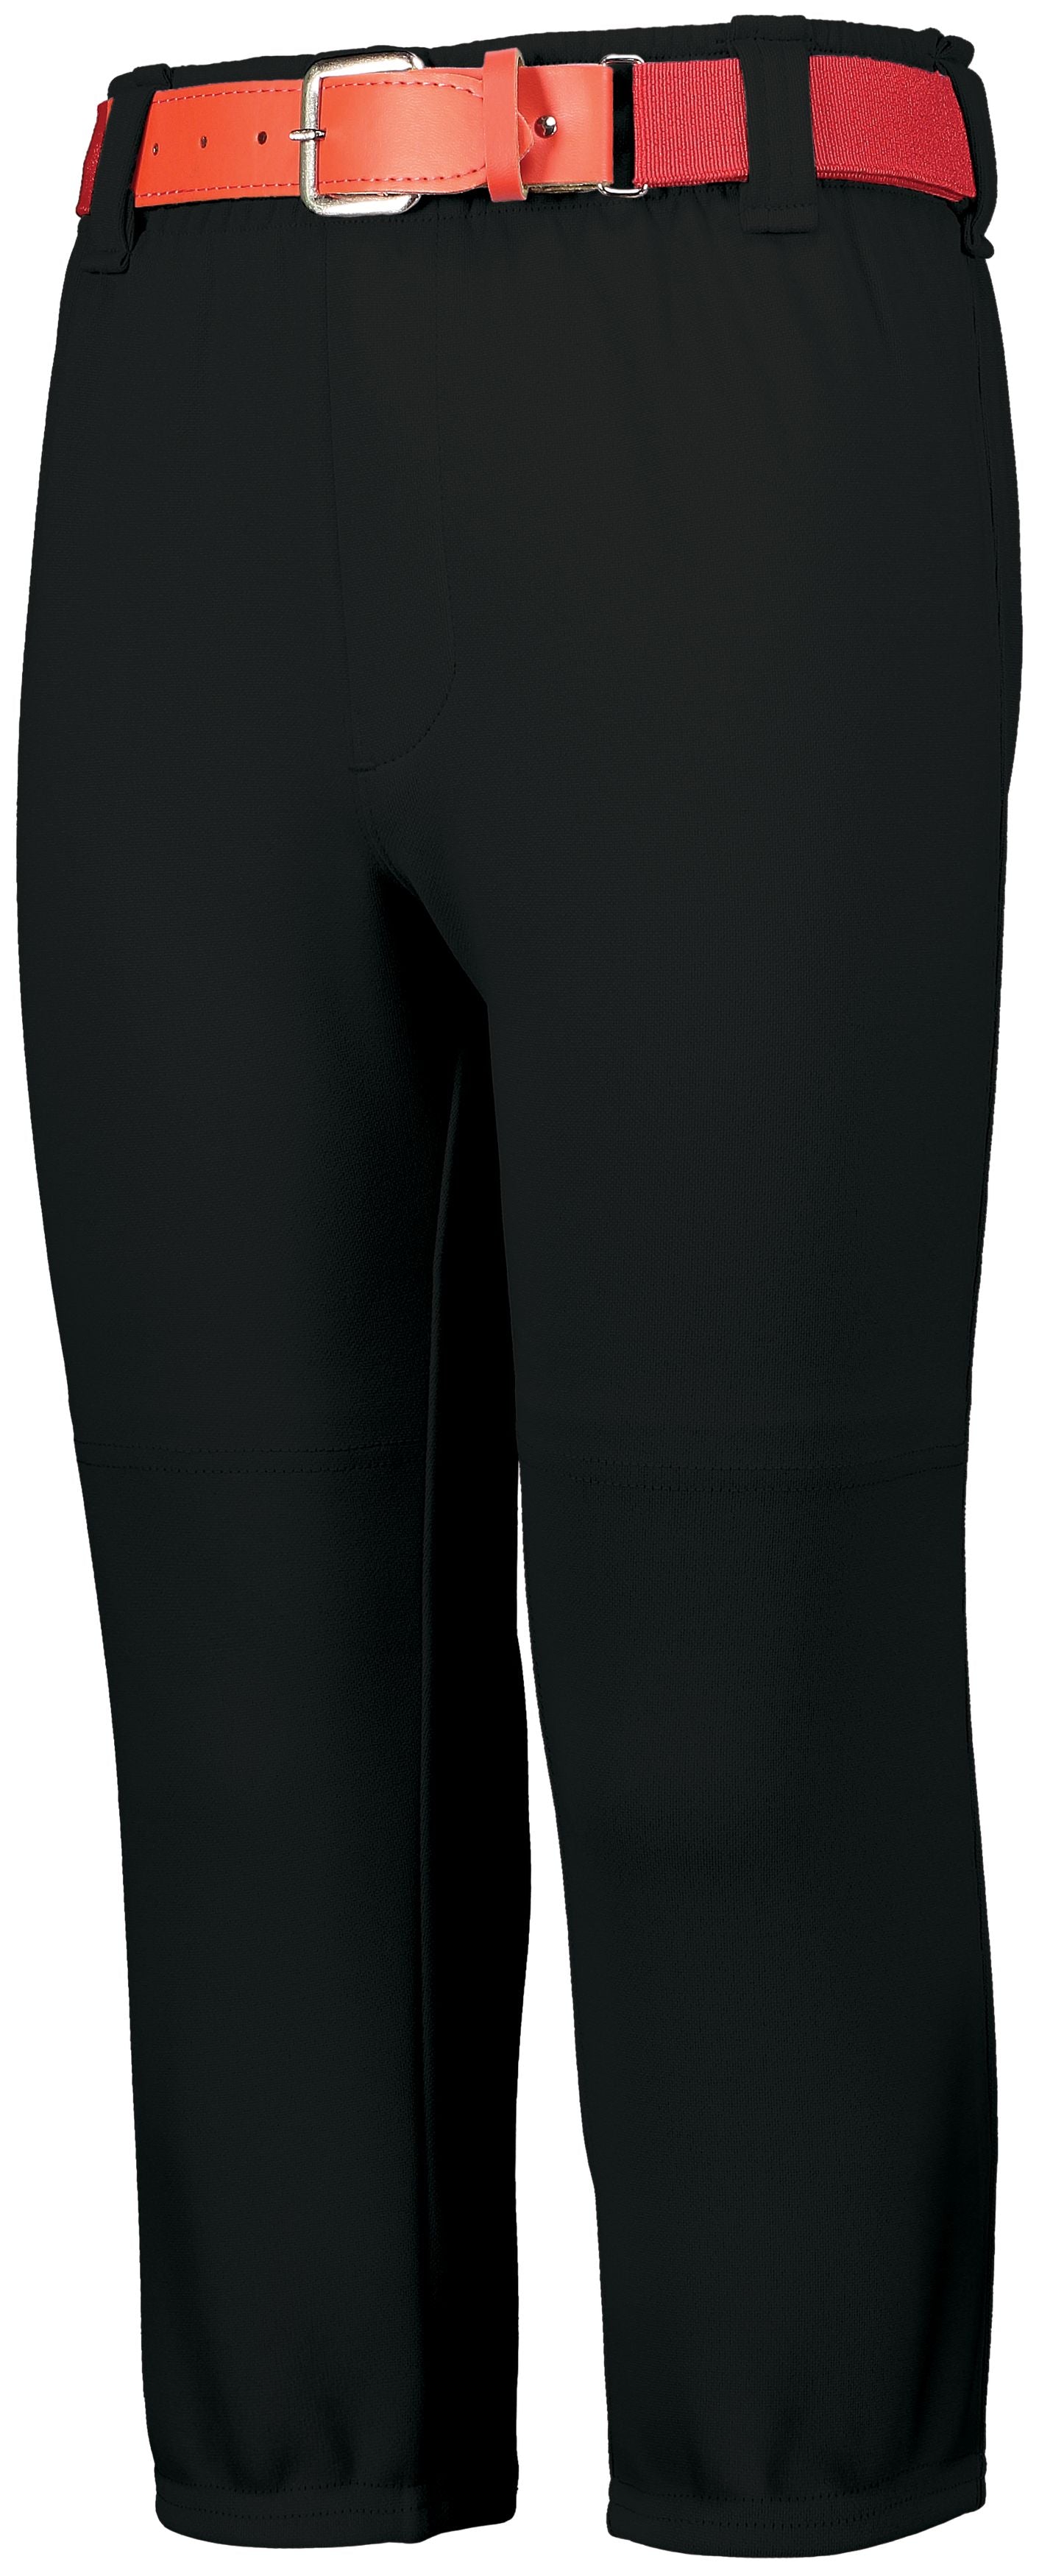 GAMER PULL-UP BASEBALL PANT WITH LOOPS Augusta 6850